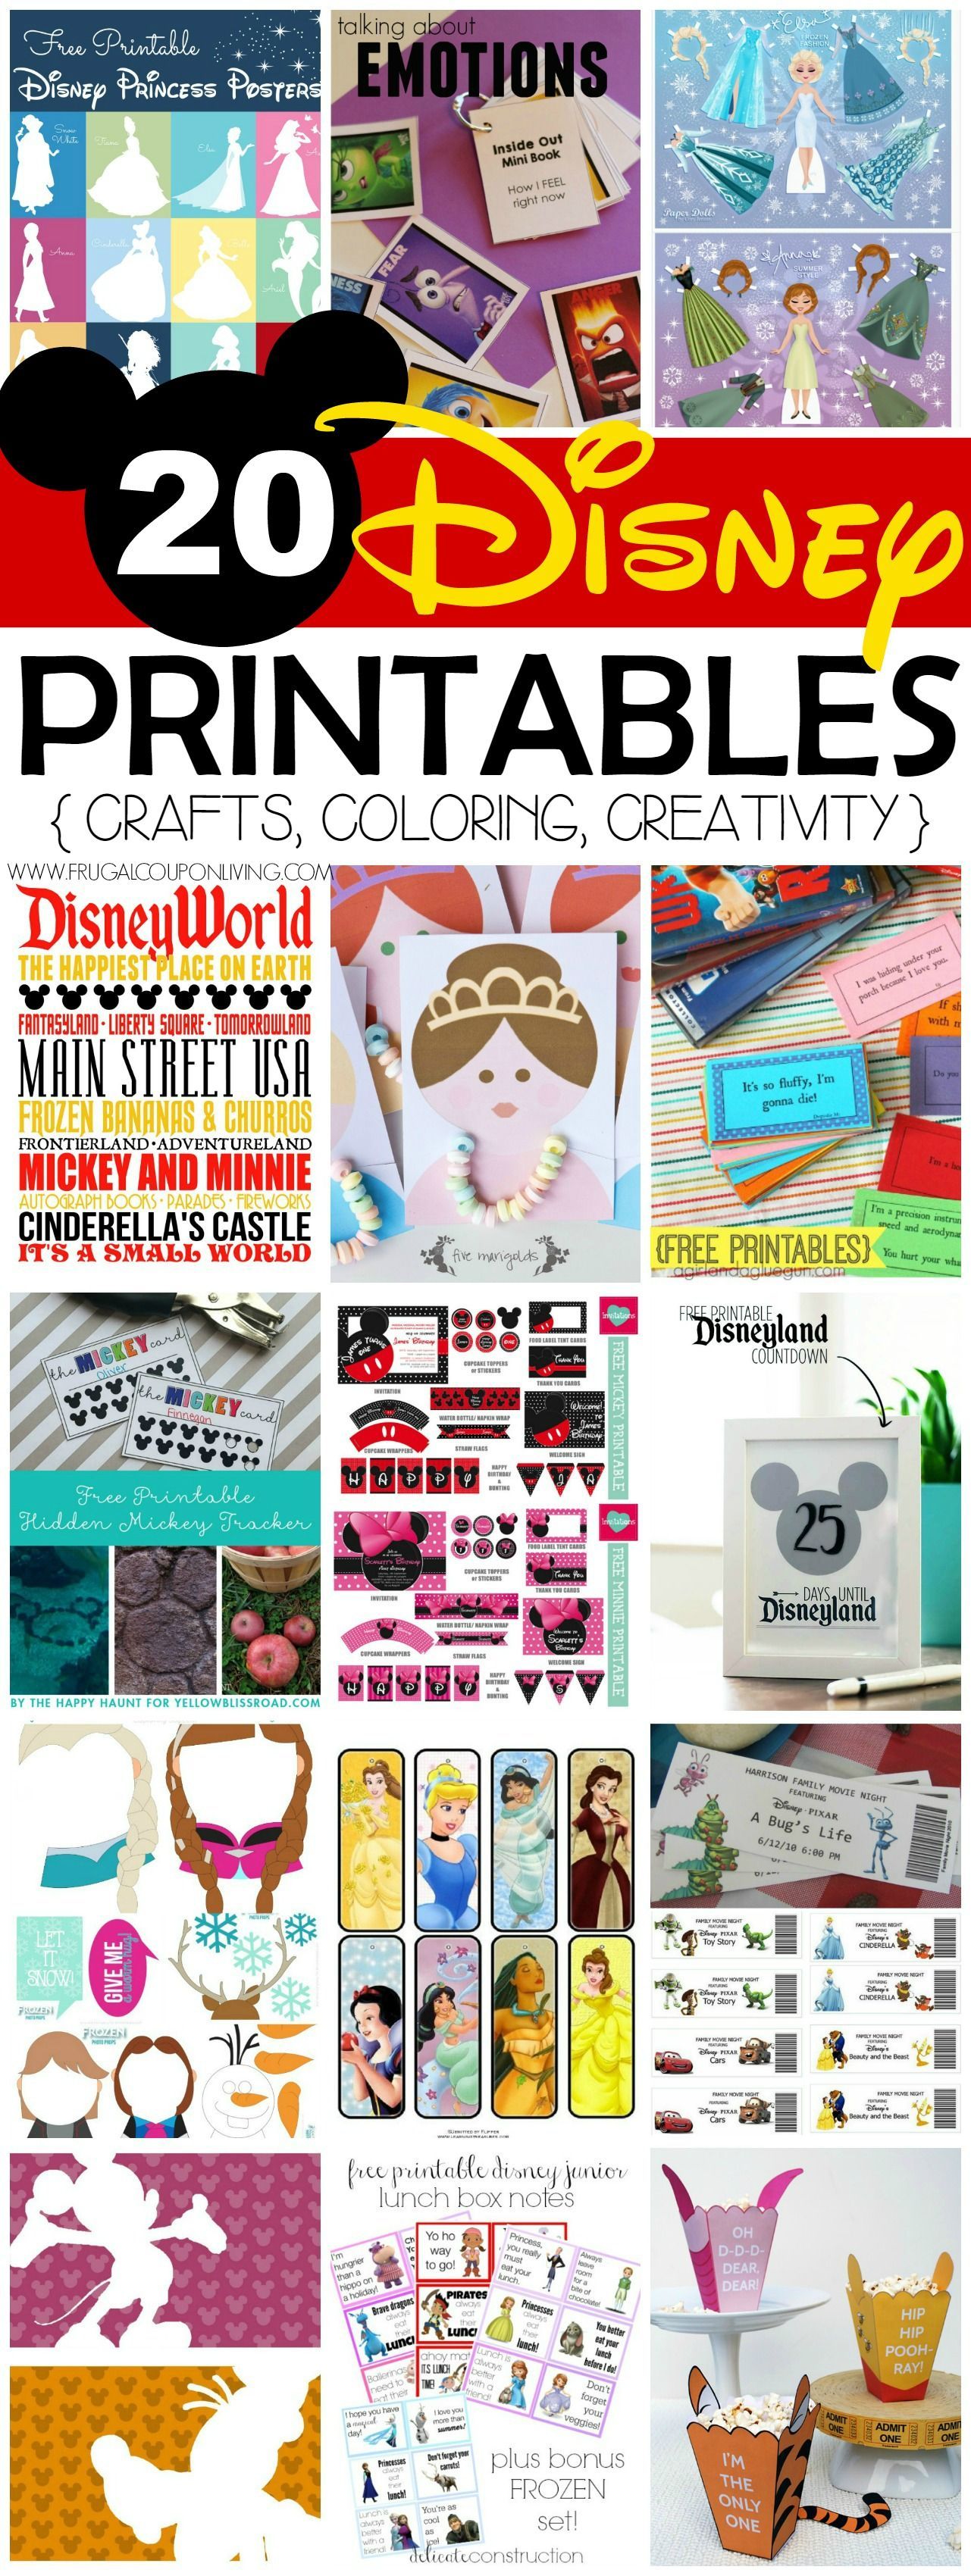 20 FREE Disney Printables – Crafts, Coloring, Planning, Creativity and More on Frugal Coupon Living.